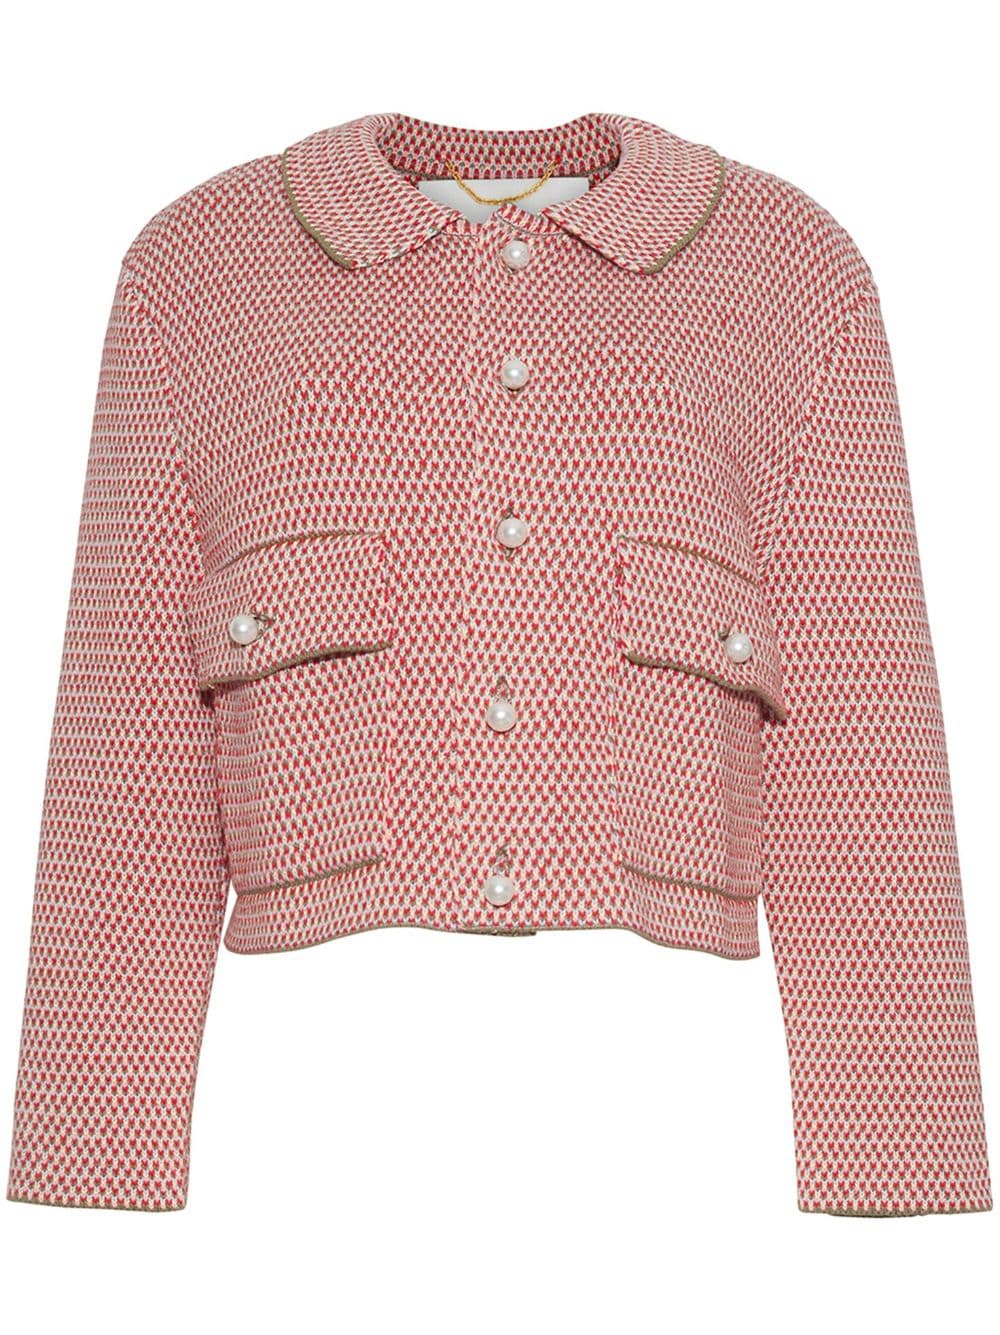 Adam Lippes cropped tweed cotton jacket - Red